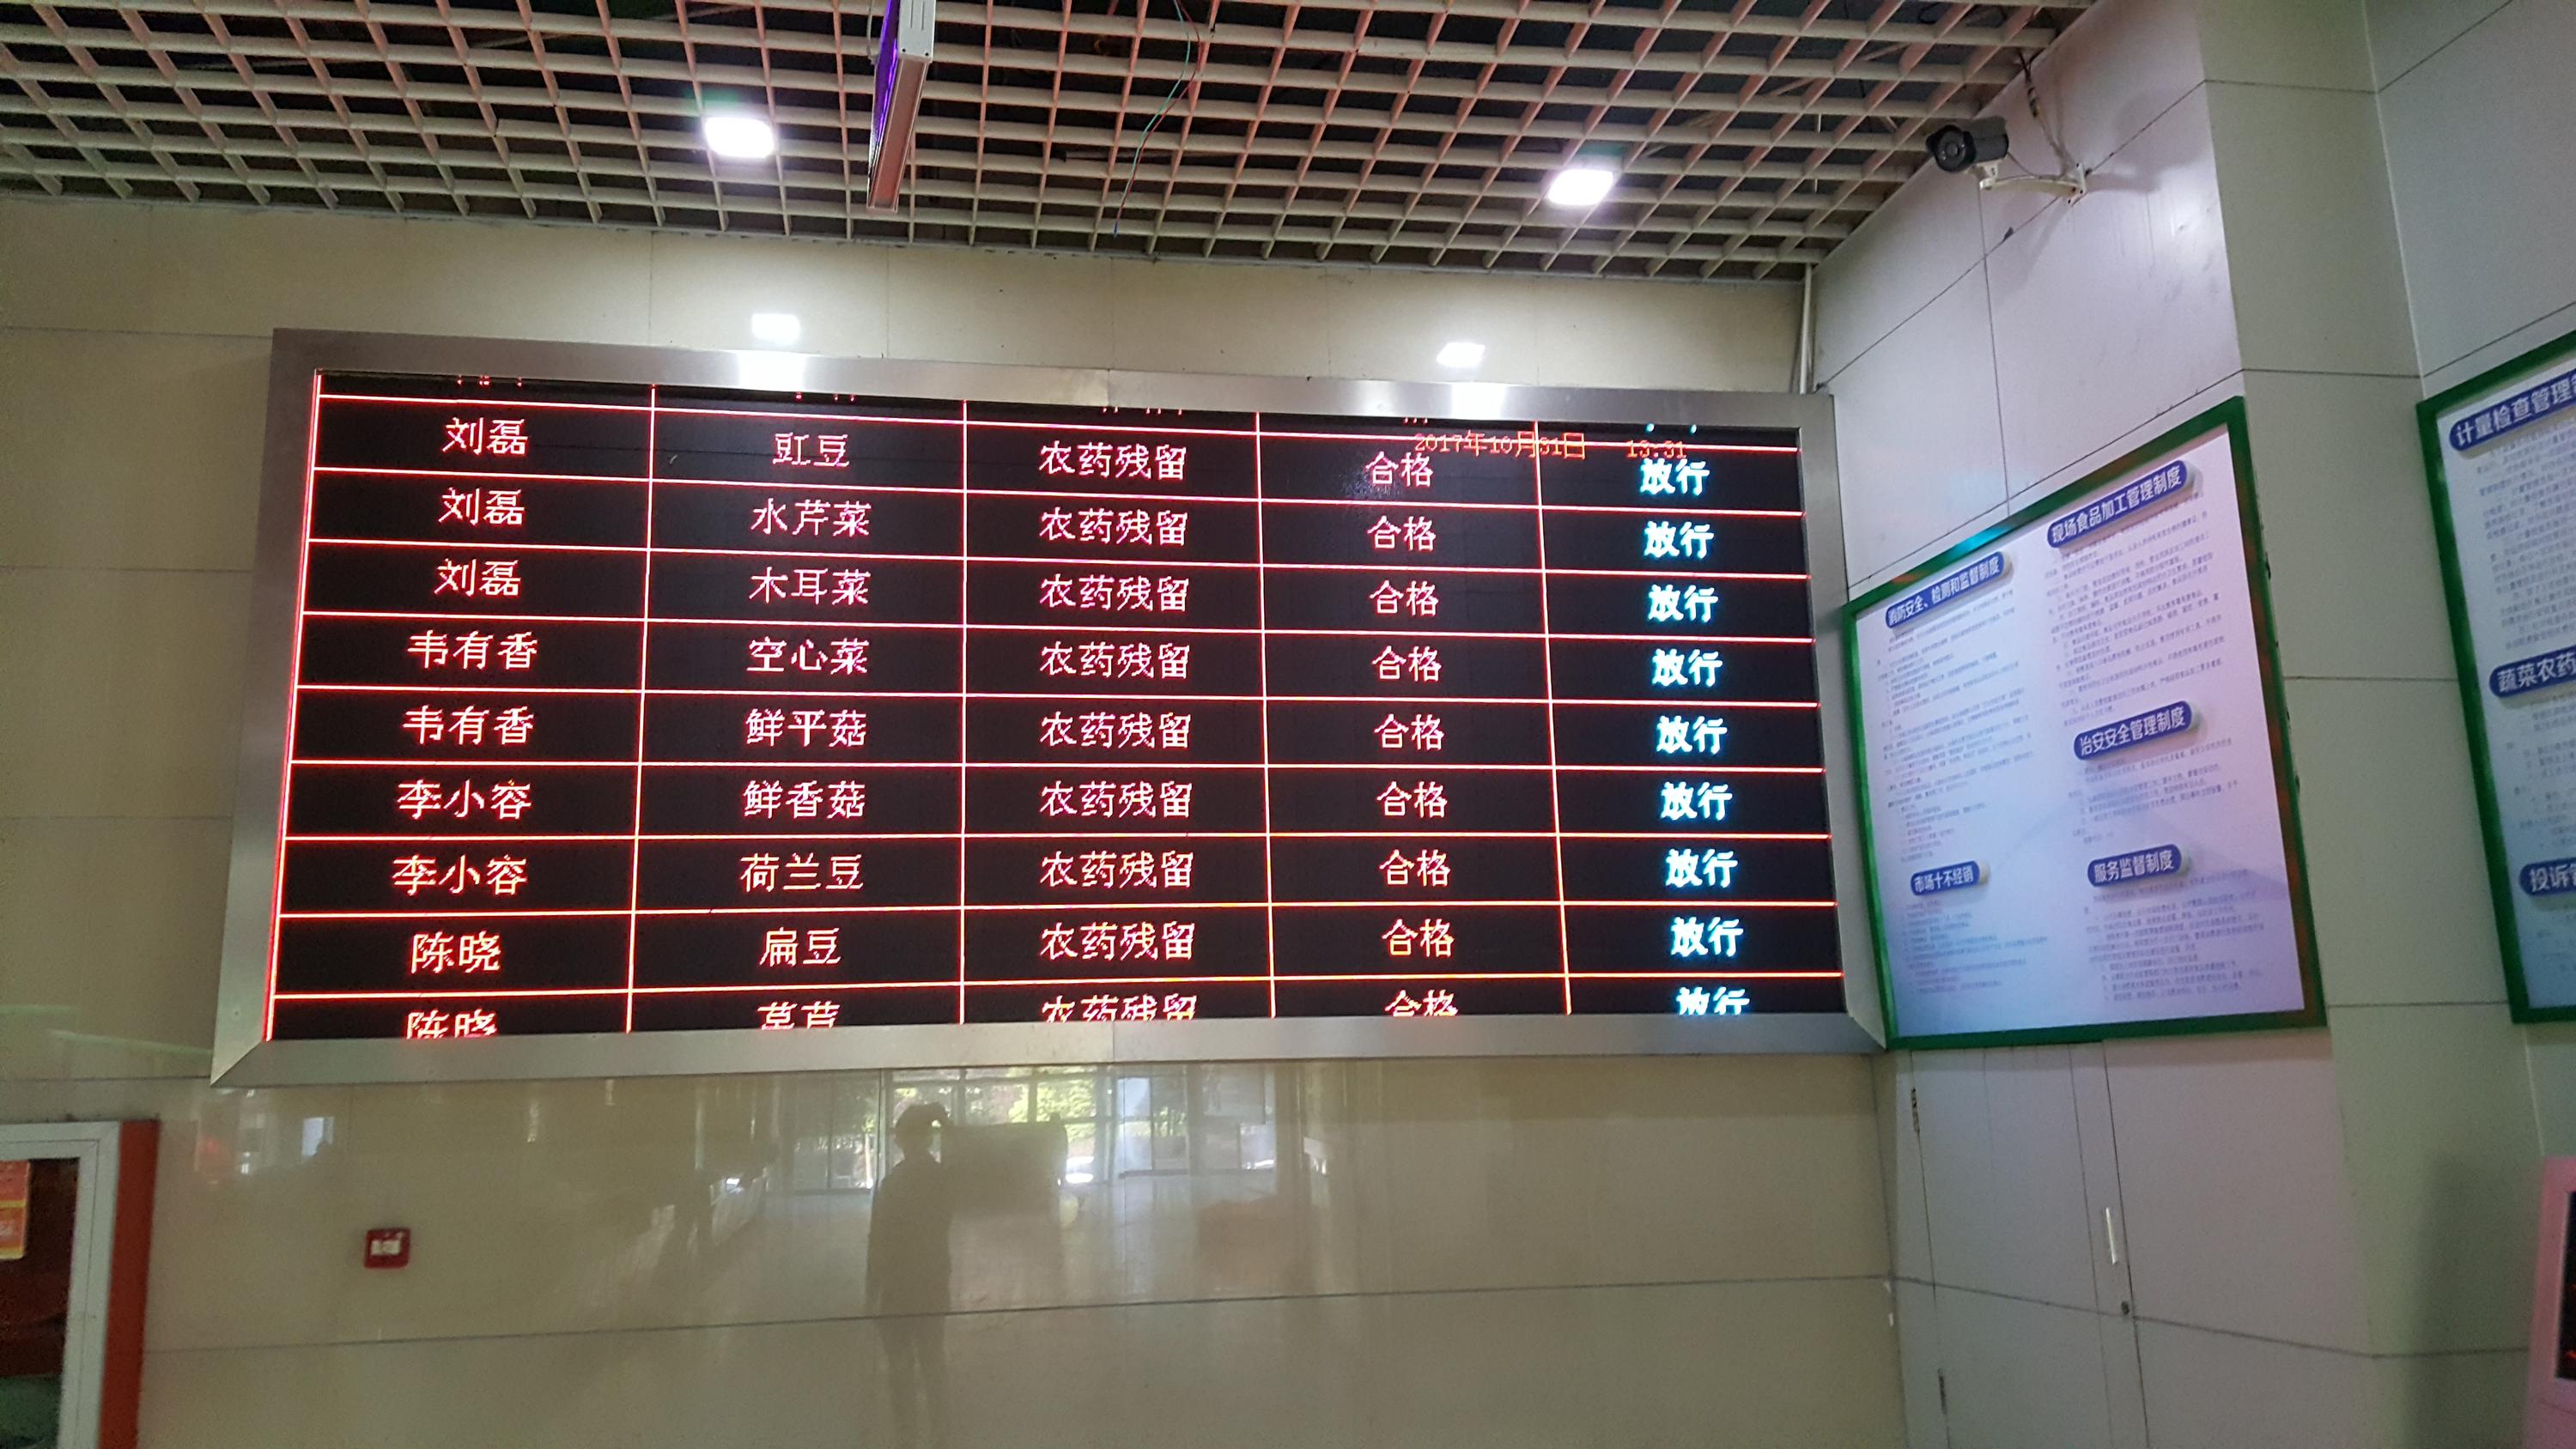 Big screen displaying the name of vendor, vegetable sold, and food safety test result